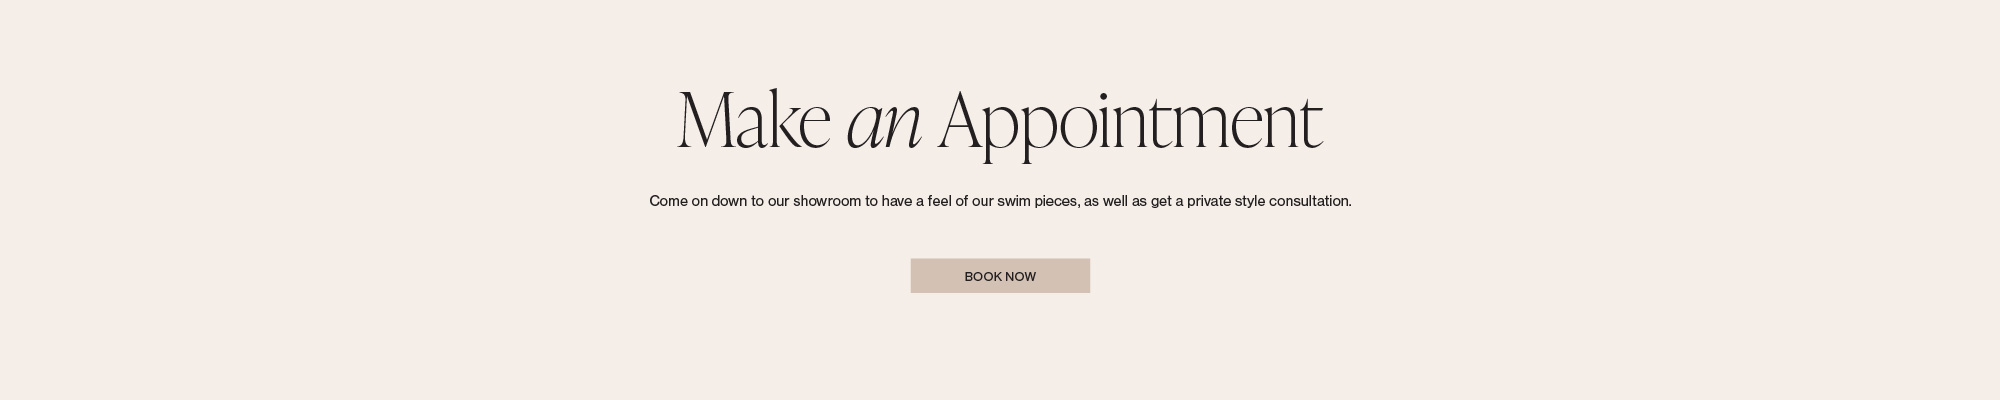 Make an appointment to Align Swim showroom